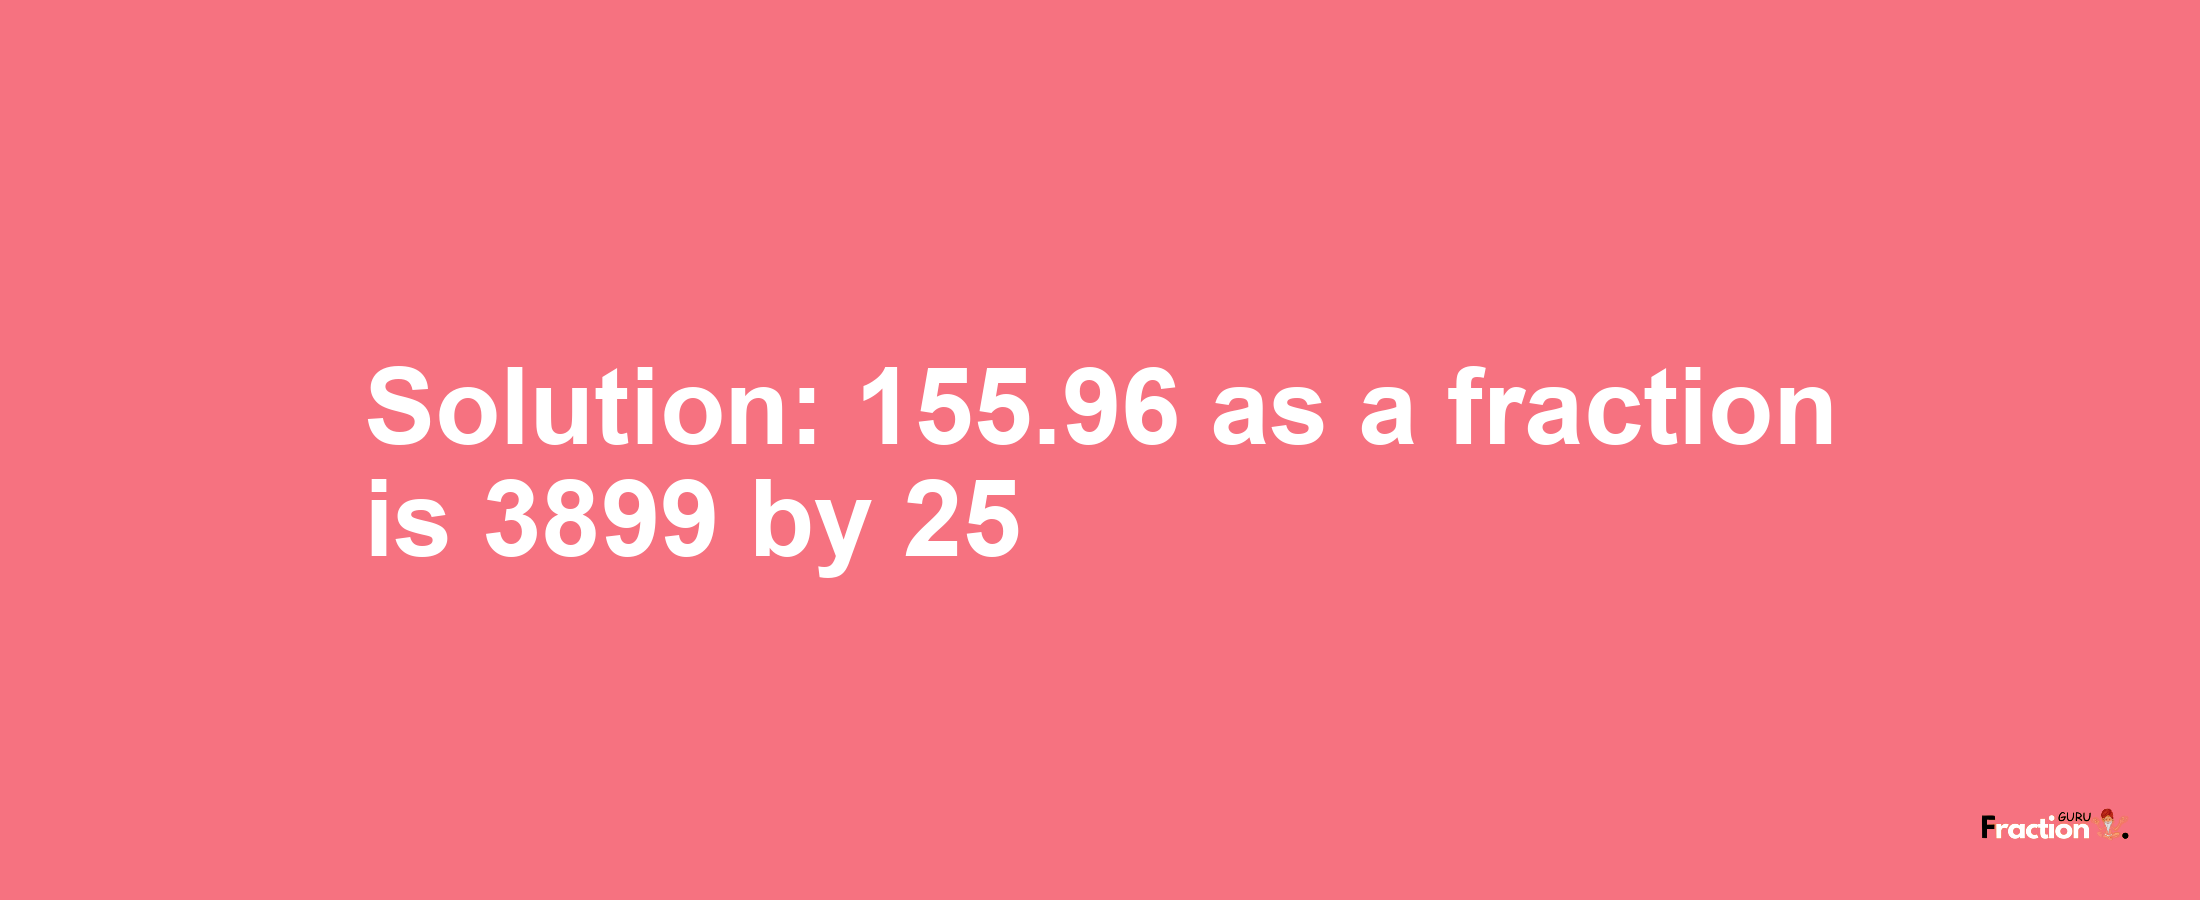 Solution:155.96 as a fraction is 3899/25